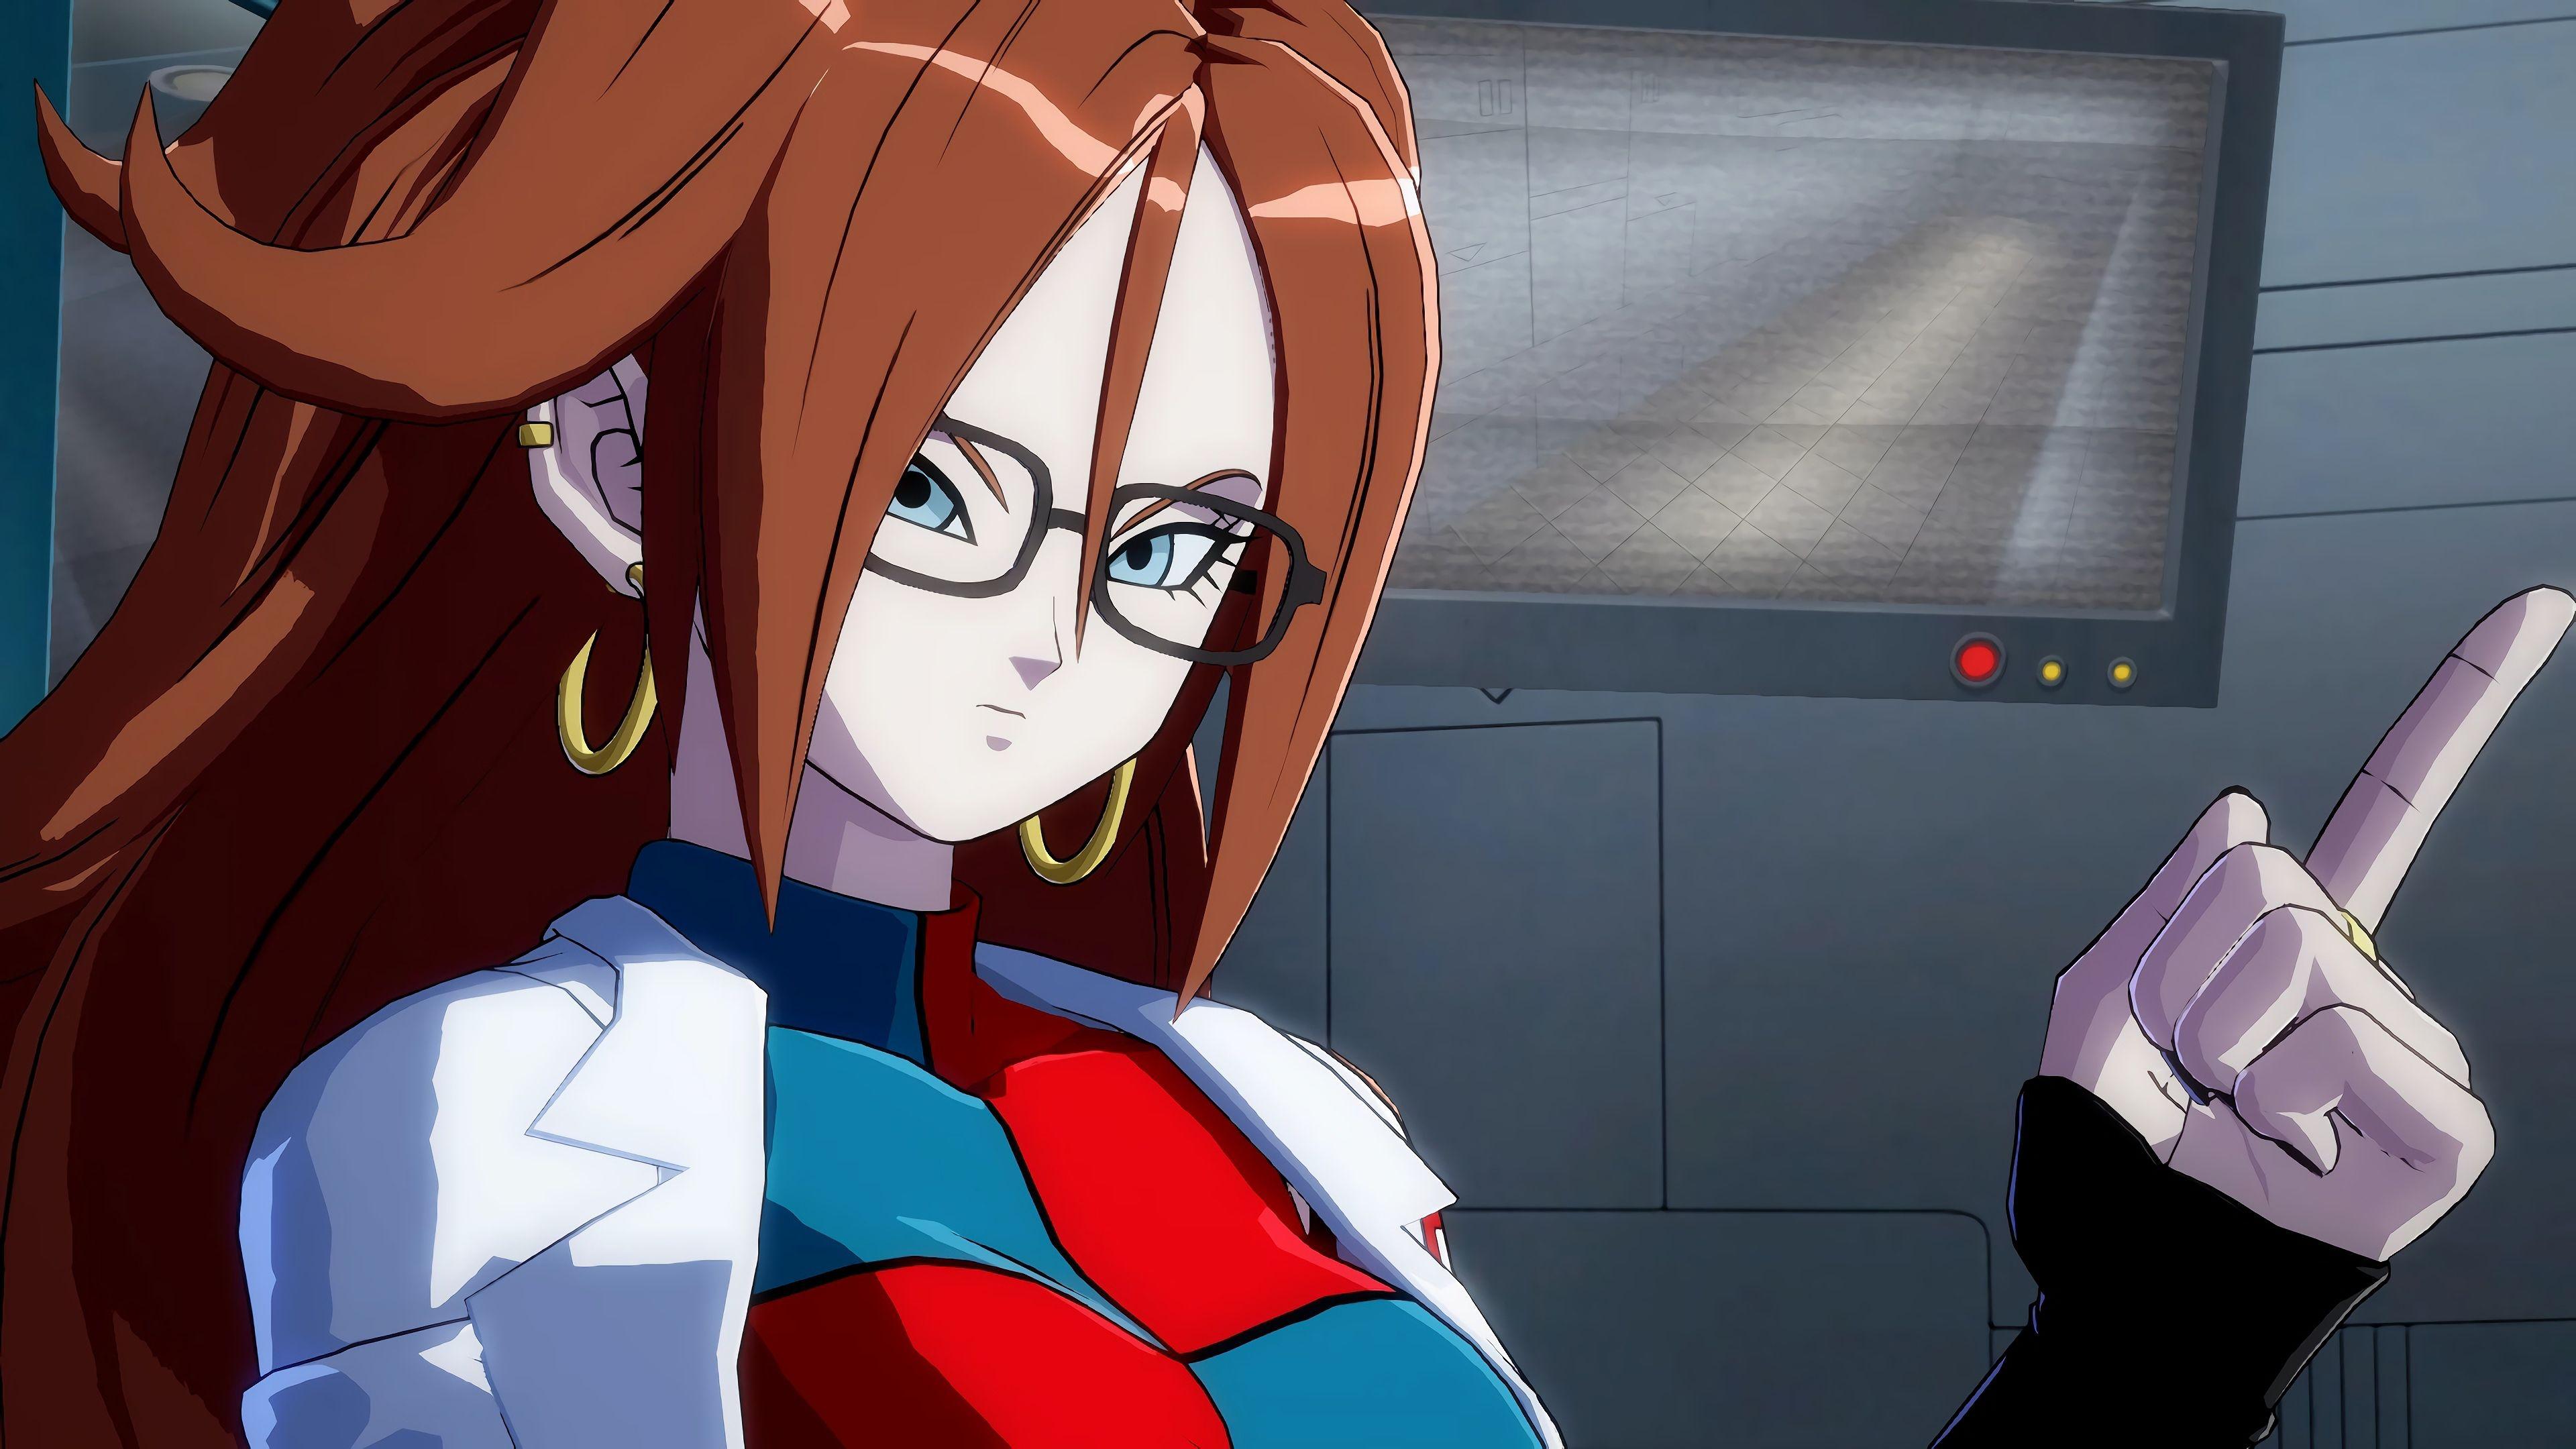 Android 21 BALL FighterZ Anime Image Board